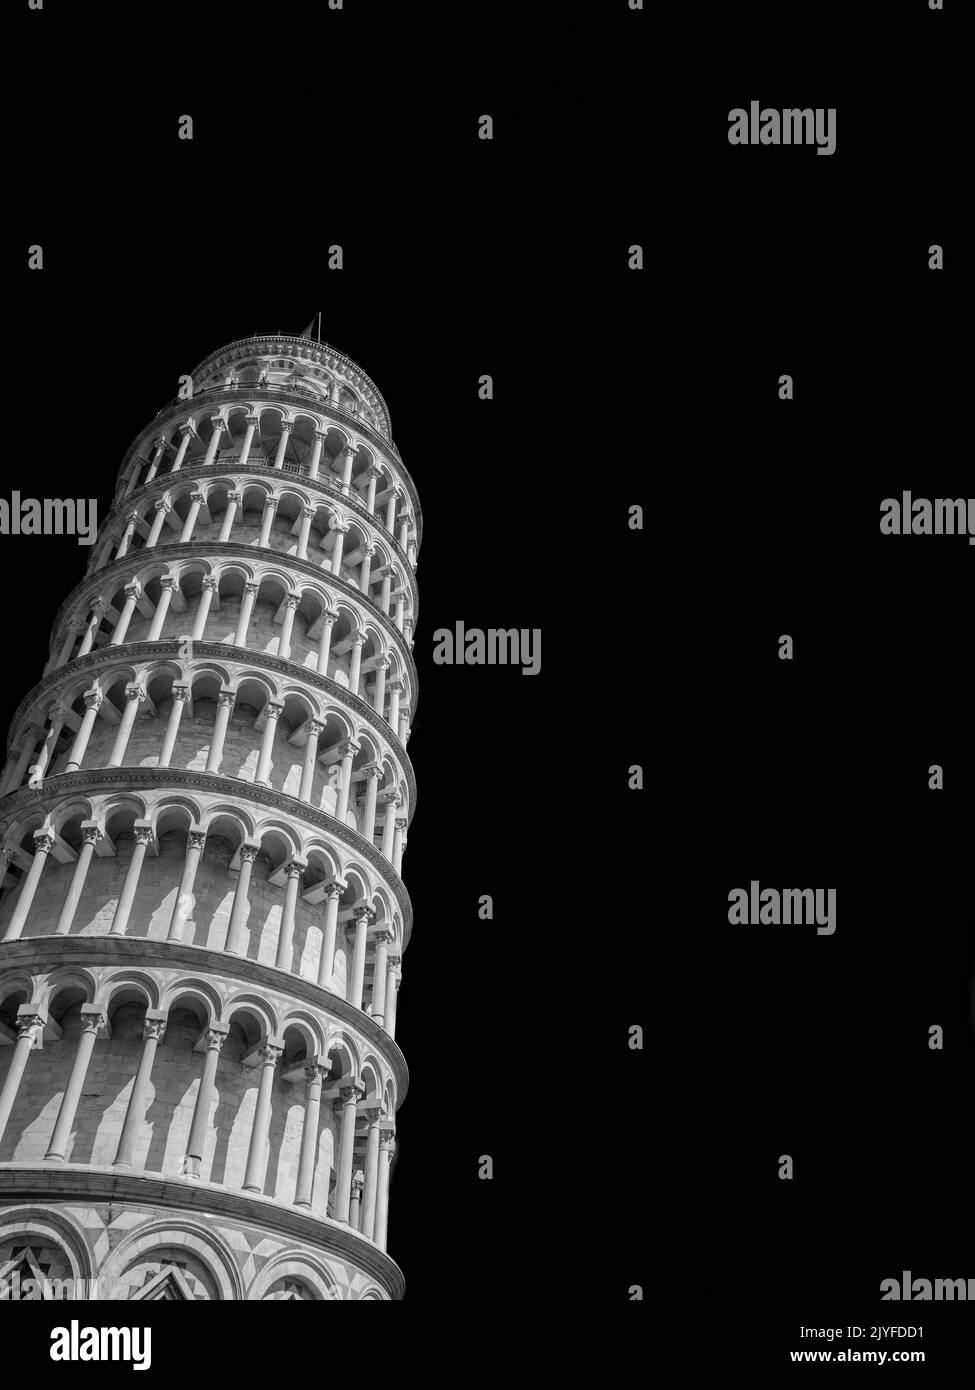 The iconic Leaning Tower of Pisa, one of the most famous ancient building in the world, seen from below (Black and White with copy space) Stock Photo